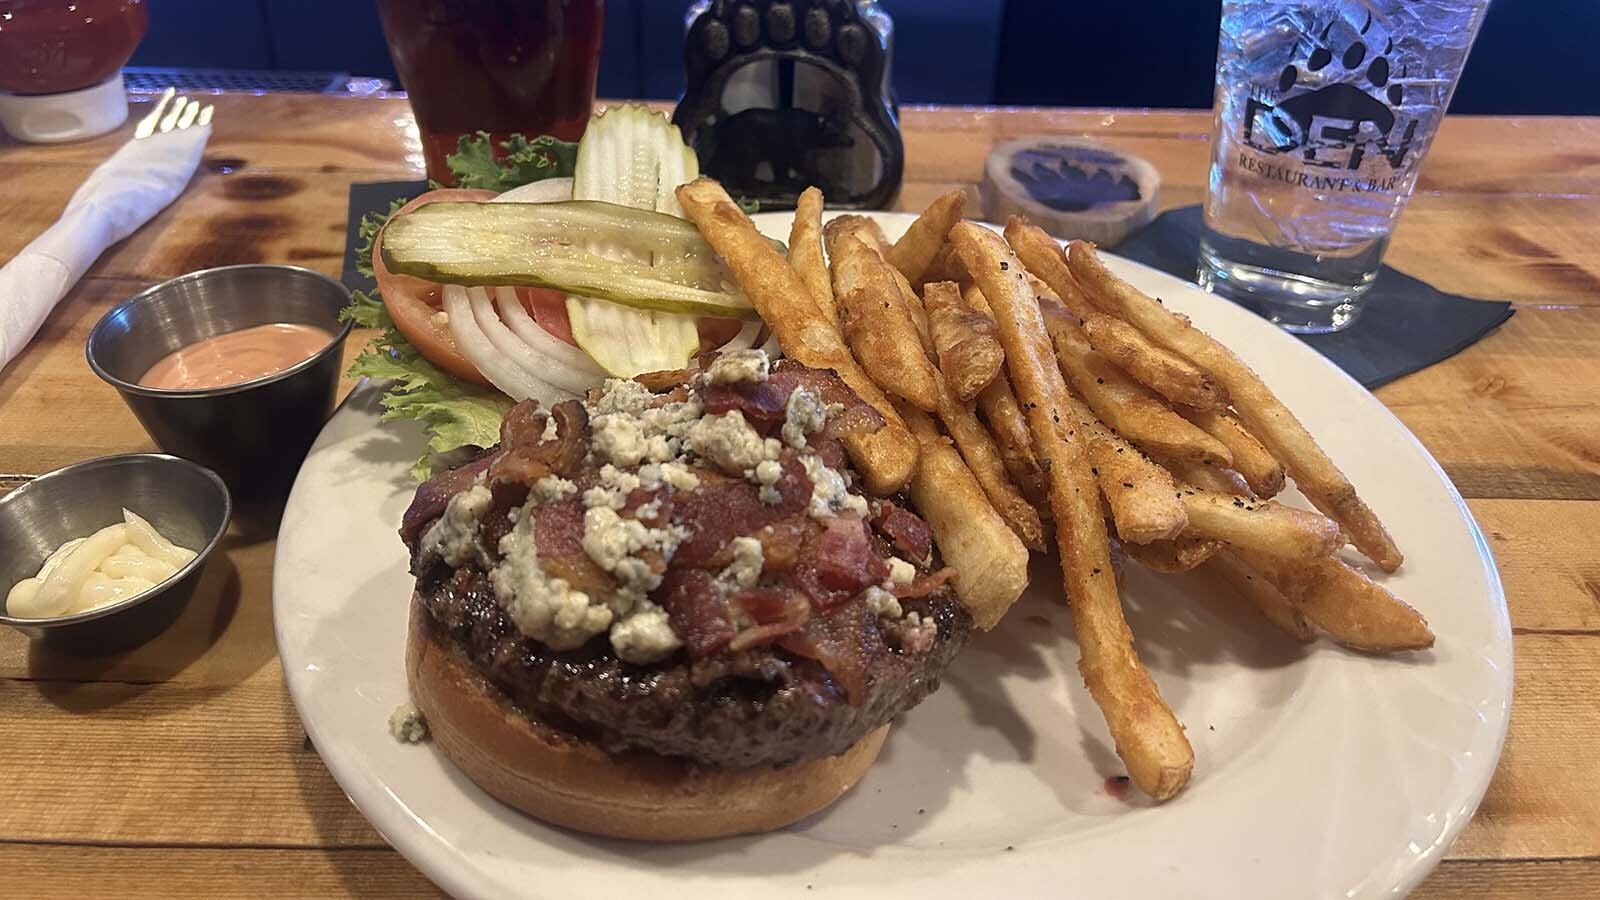 The build your own burger available at the Bear Den in Daniel is a hidden gem on a diverse menu.